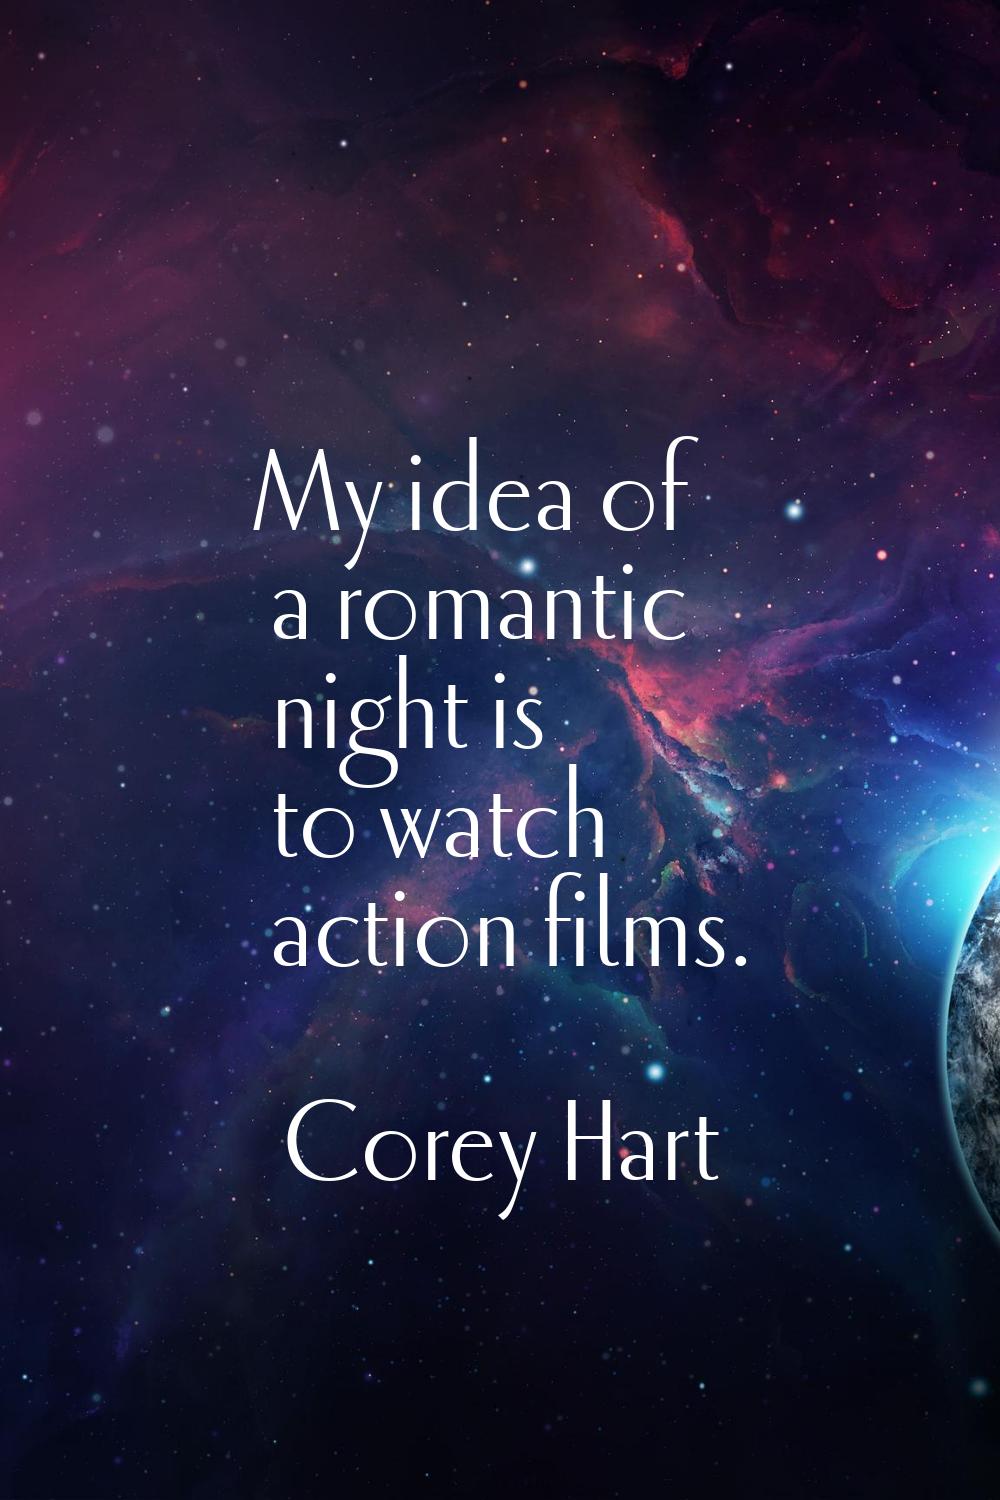 My idea of a romantic night is to watch action films.